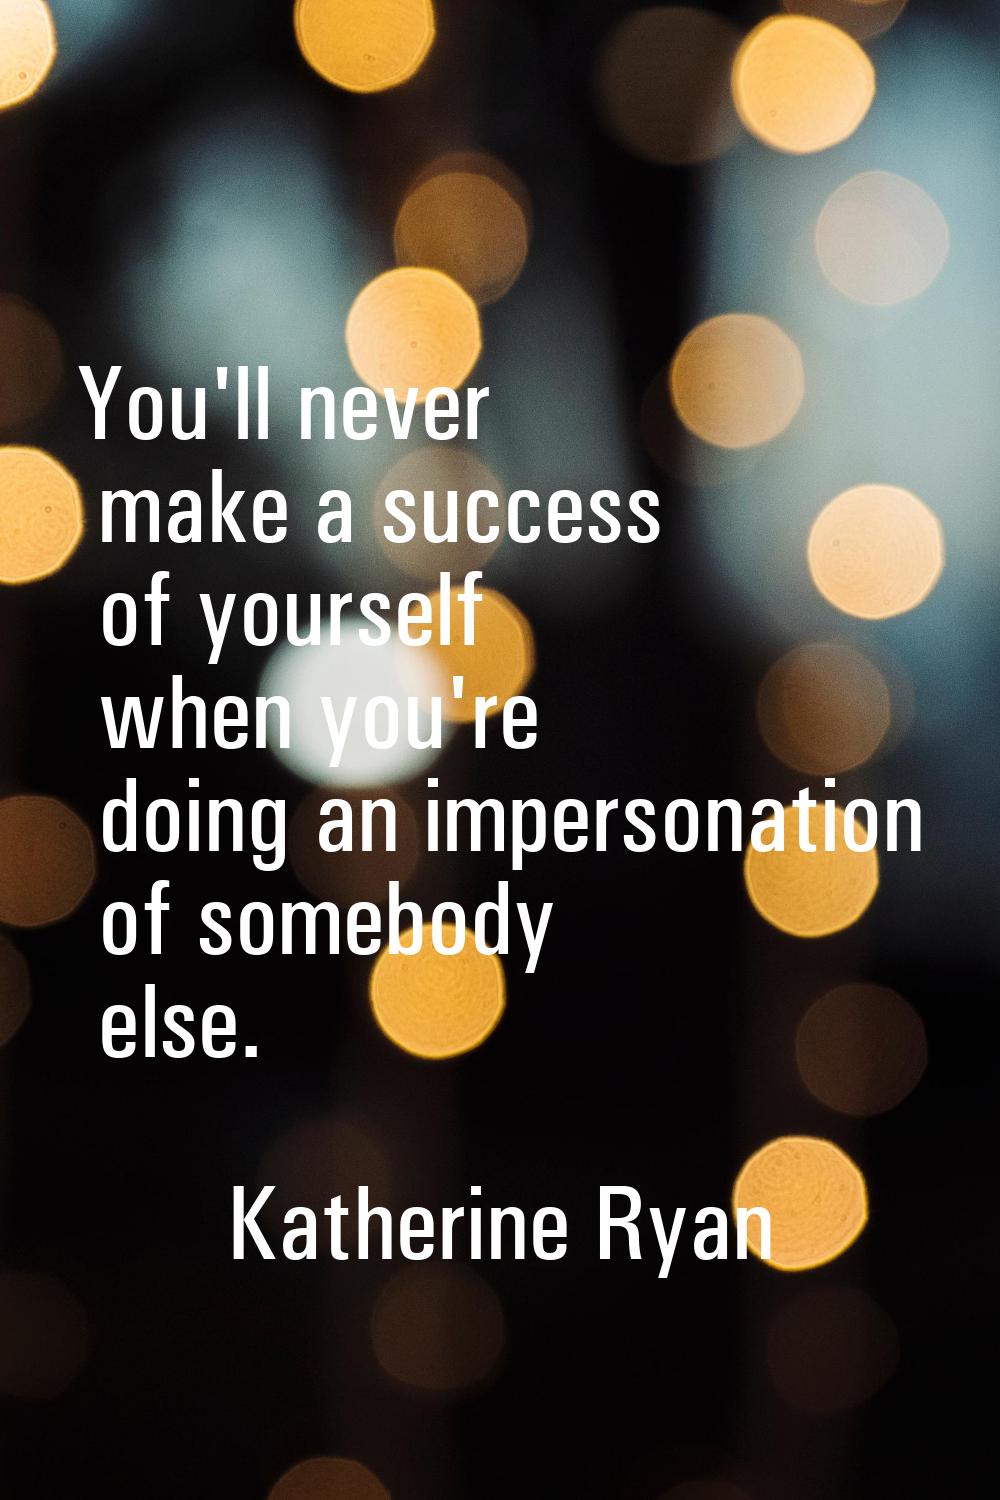 You'll never make a success of yourself when you're doing an impersonation of somebody else.